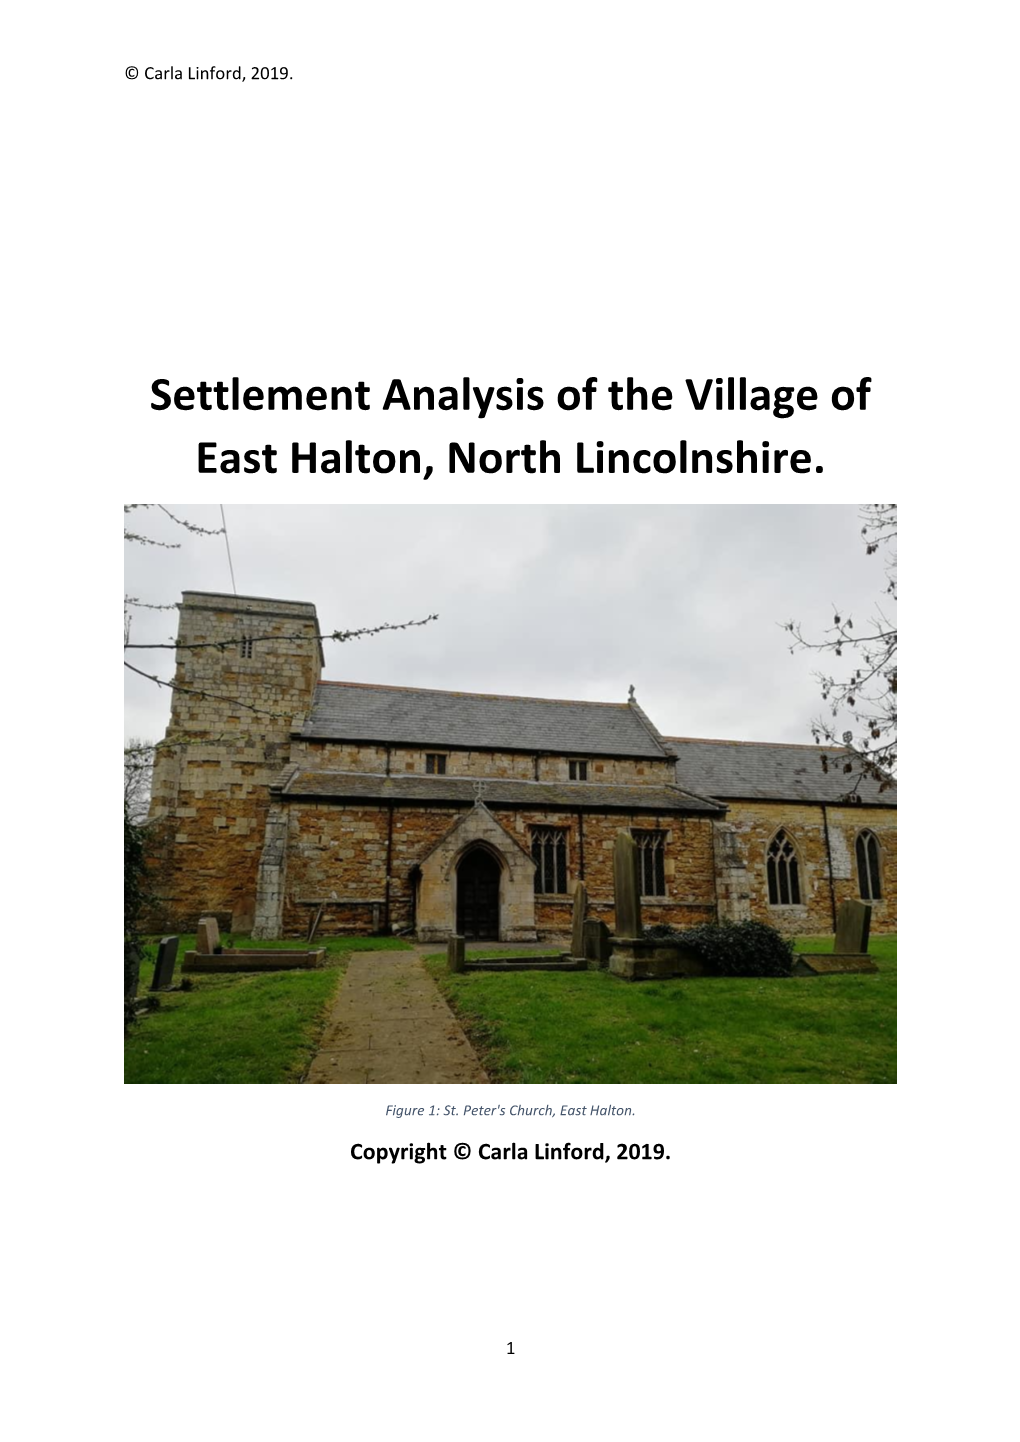 Settlement Analysis of the Village of East Halton, North Lincolnshire